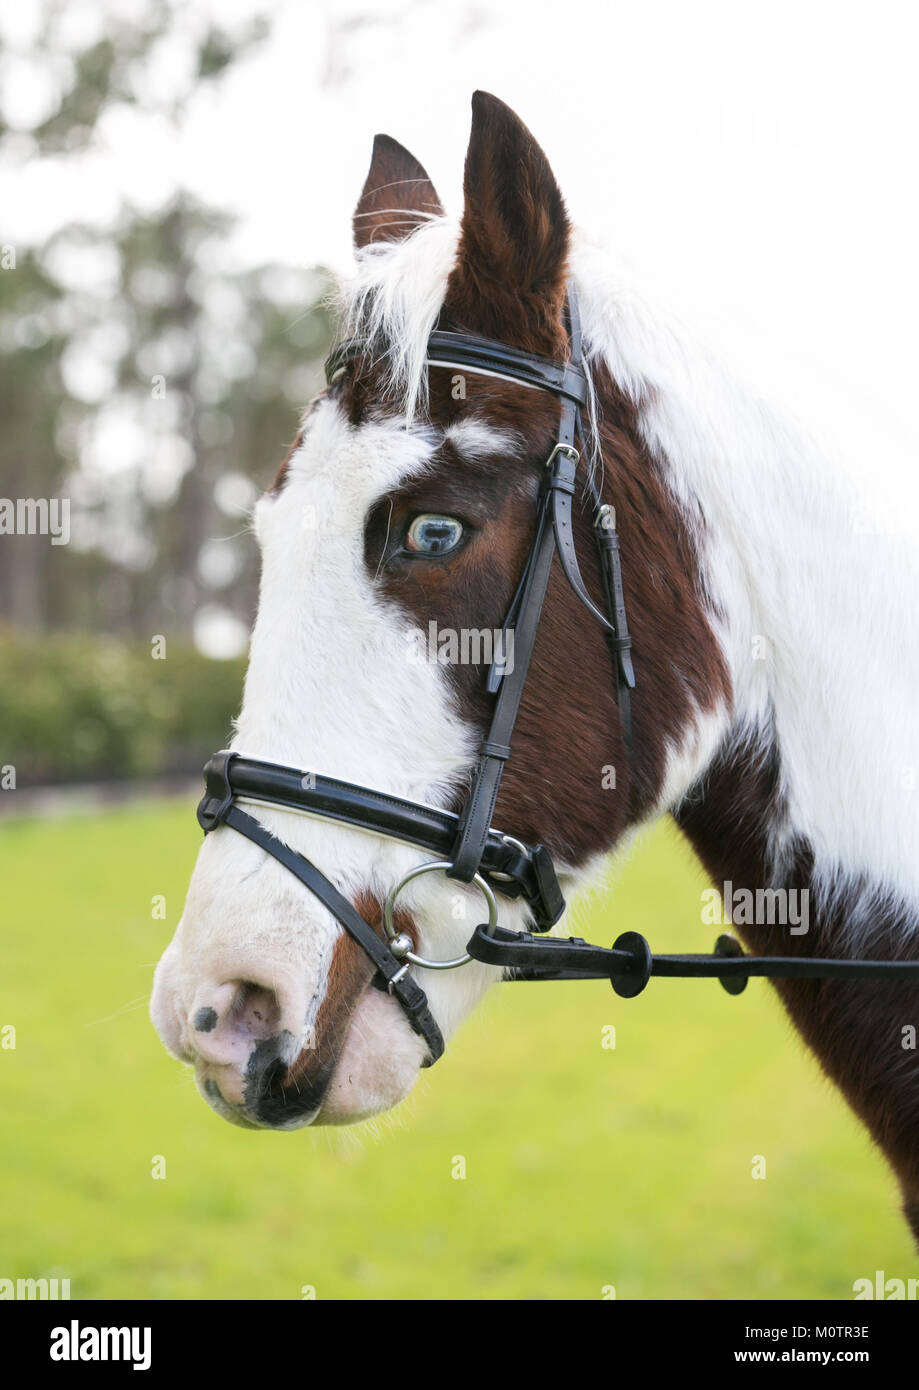 Horse with bright blue eyes Stock Photo